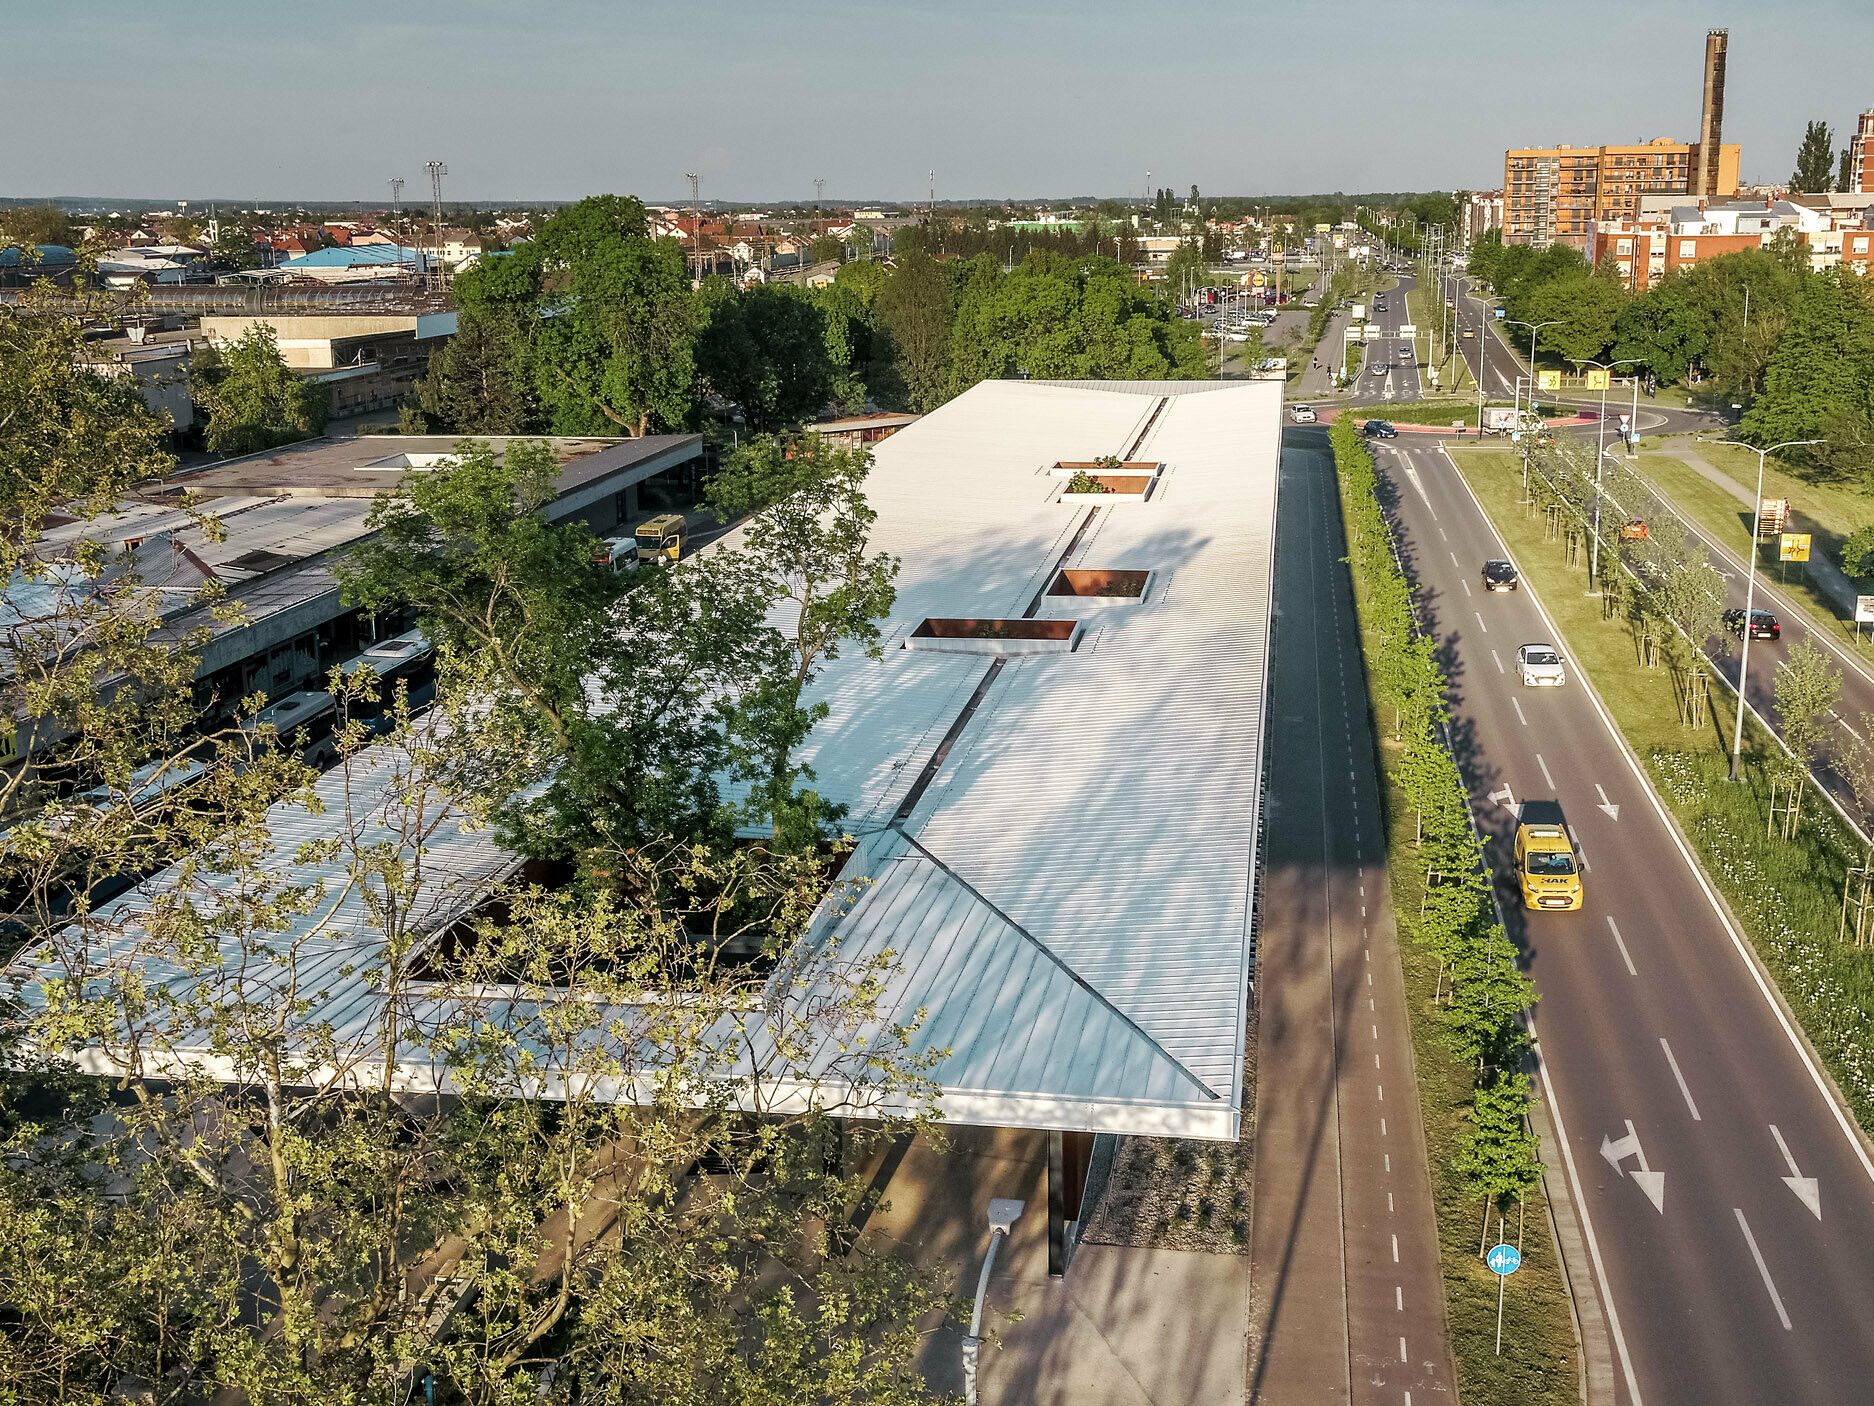 The picture shows an expansive view of a modern bus stop in Croatia, covered with a white Prefalz roof from PREFA. The roof is interrupted by several rectangular openings from which trees protrude. The bus stop is located next to a wide, two-lane road lined with trees. Various buildings and residential houses that characterise the urban surroundings can be seen in the background.